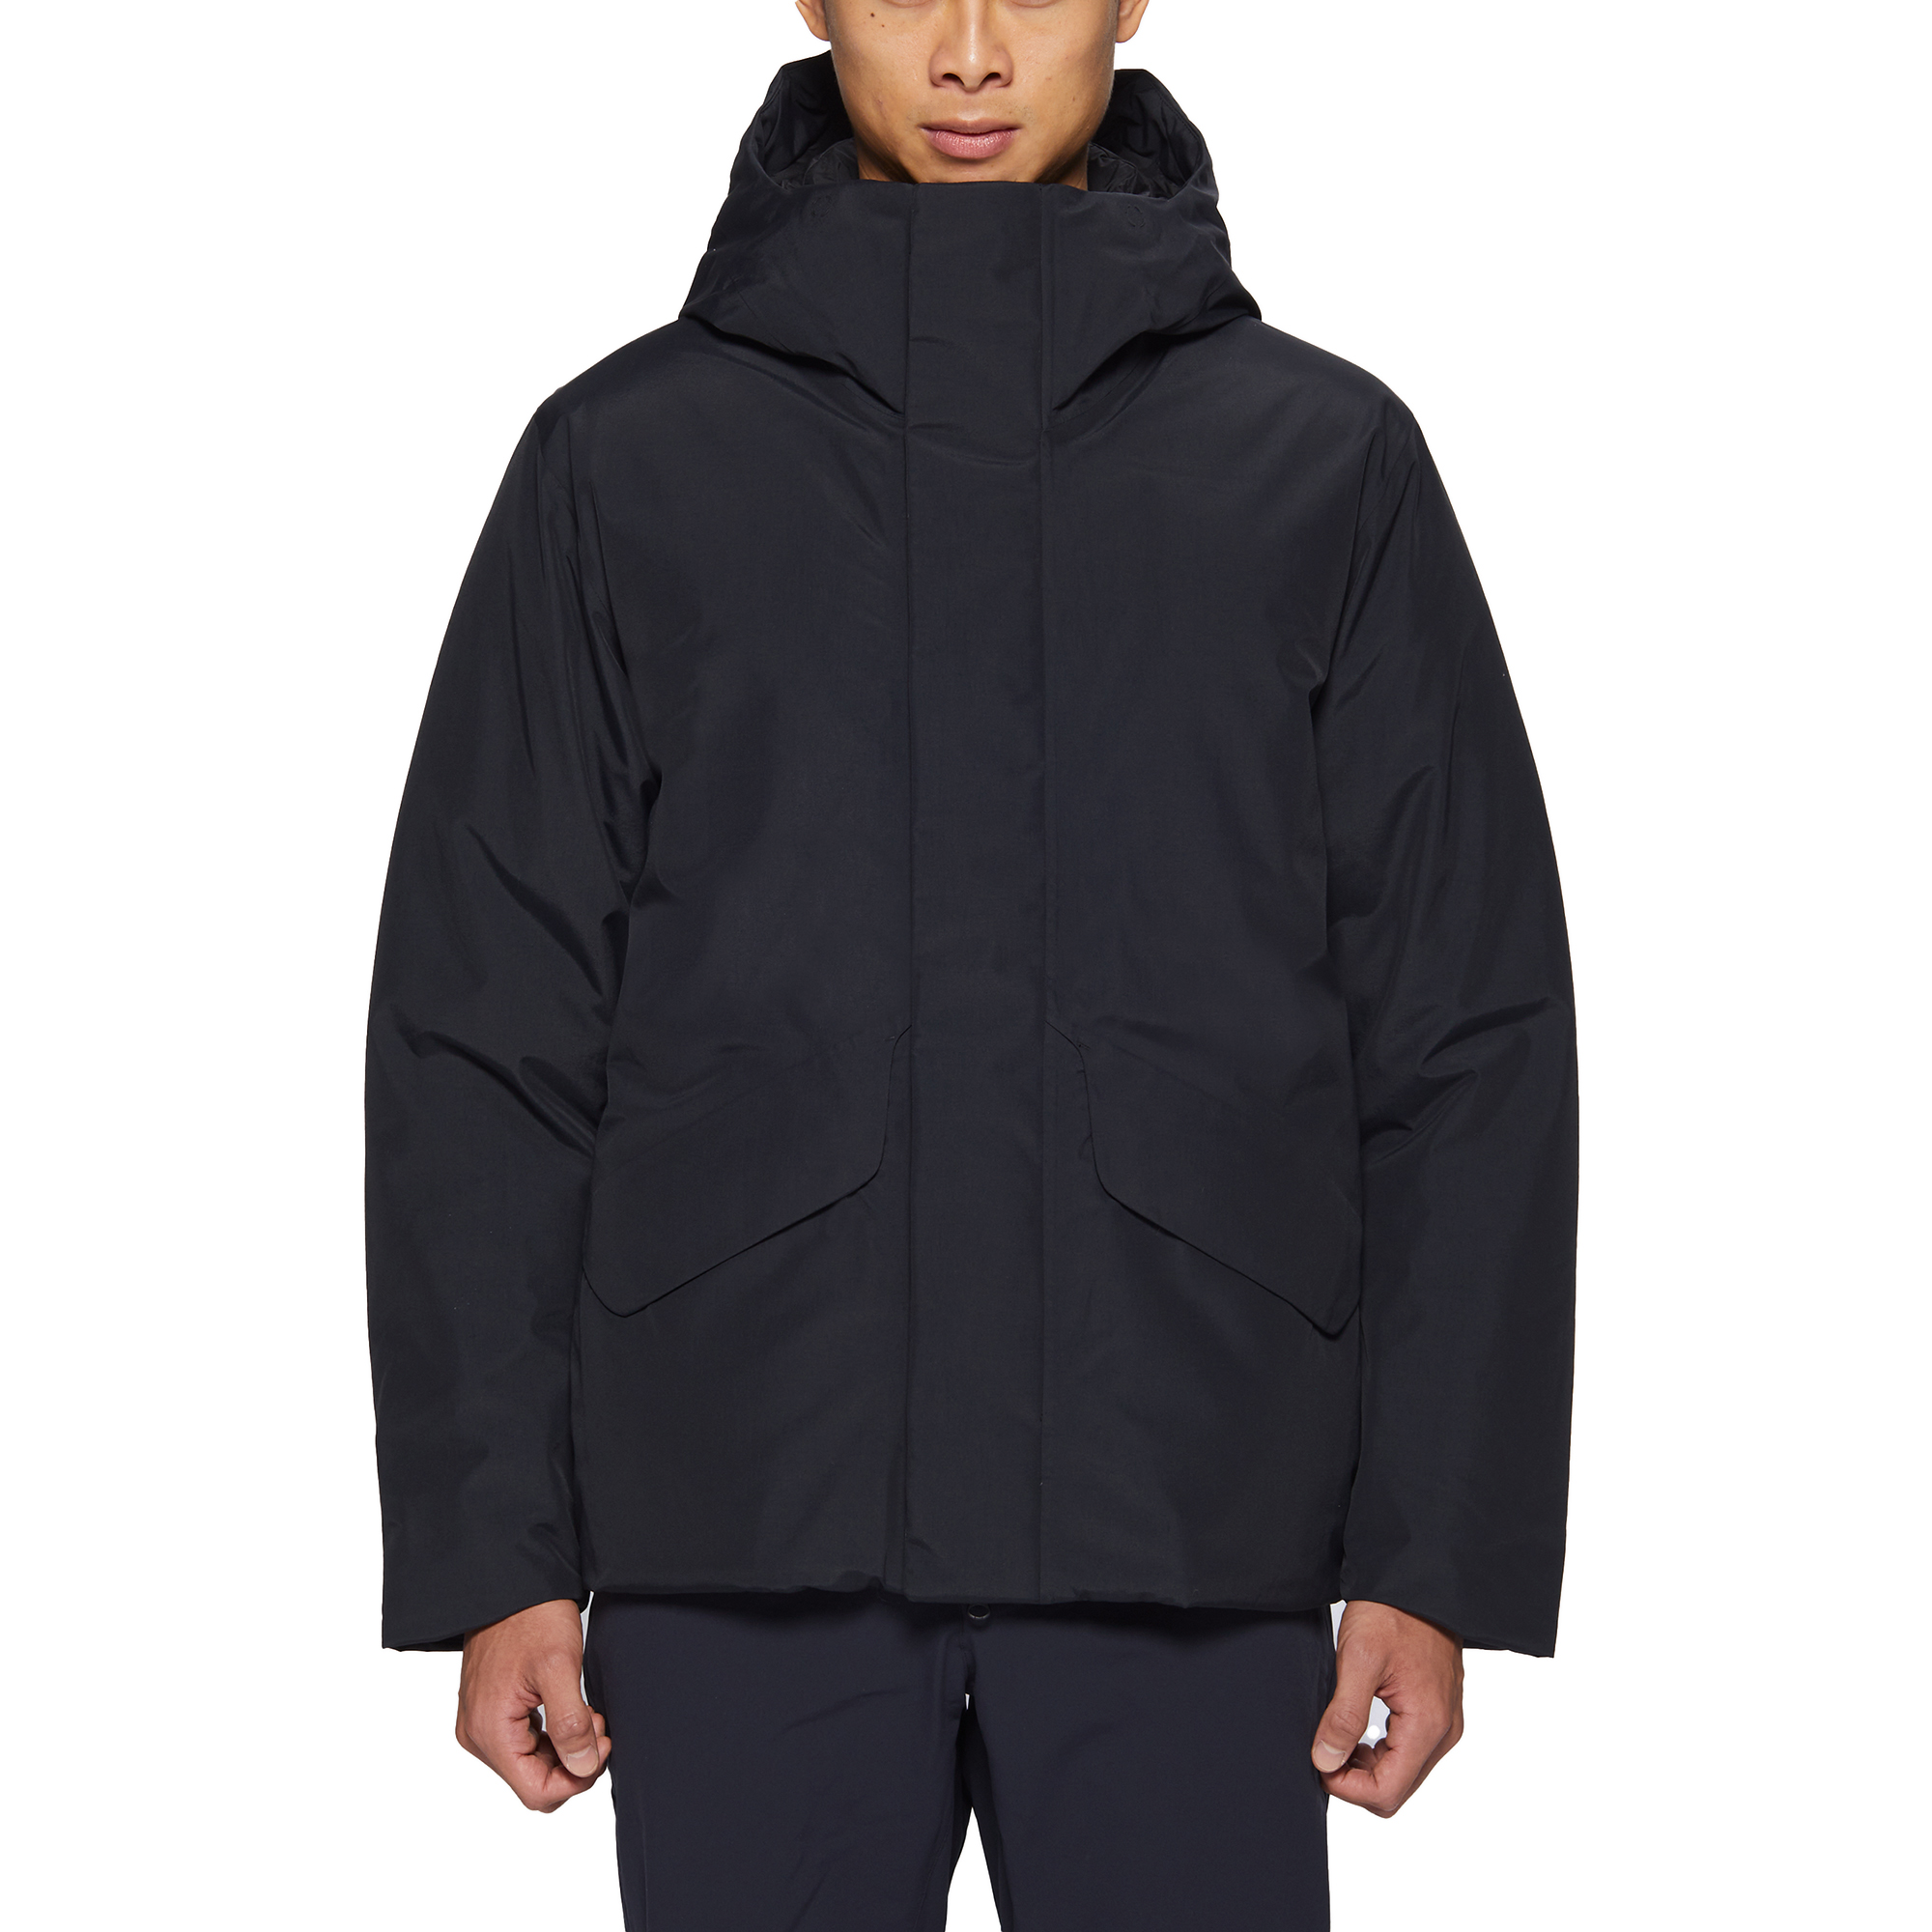 Goldwin GORE-TEX Hooded Down Jacket - Black | Insulated Jackets